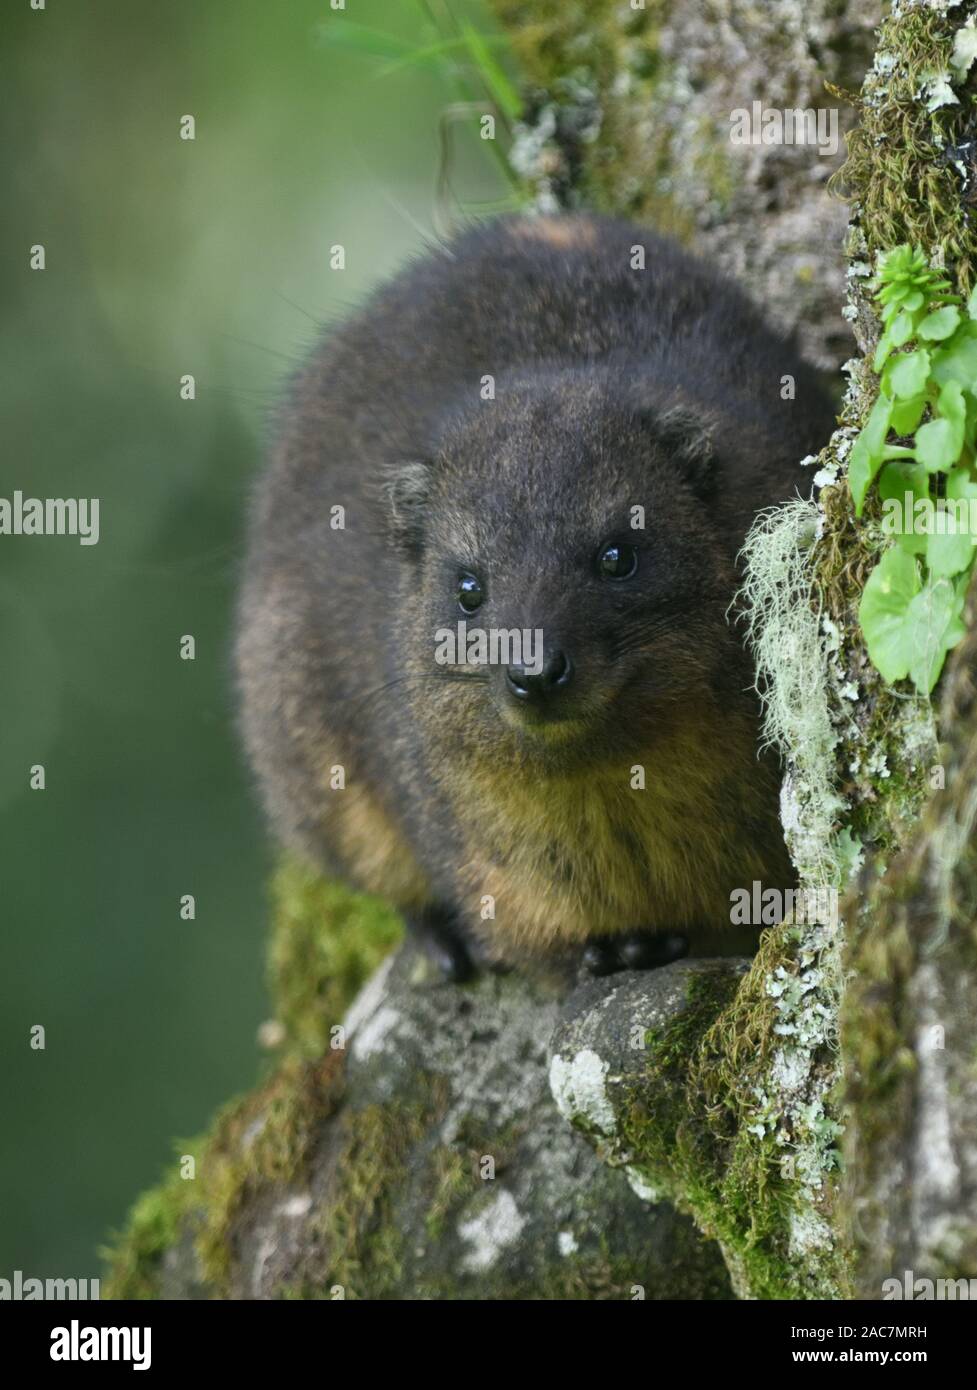 A southern tree hyrax or tree dassie (Dendrohyrax arboreus) sits outside a hole in a tree in the damp montane forest on the slopes of Kilimanjaro. Kil Stock Photo